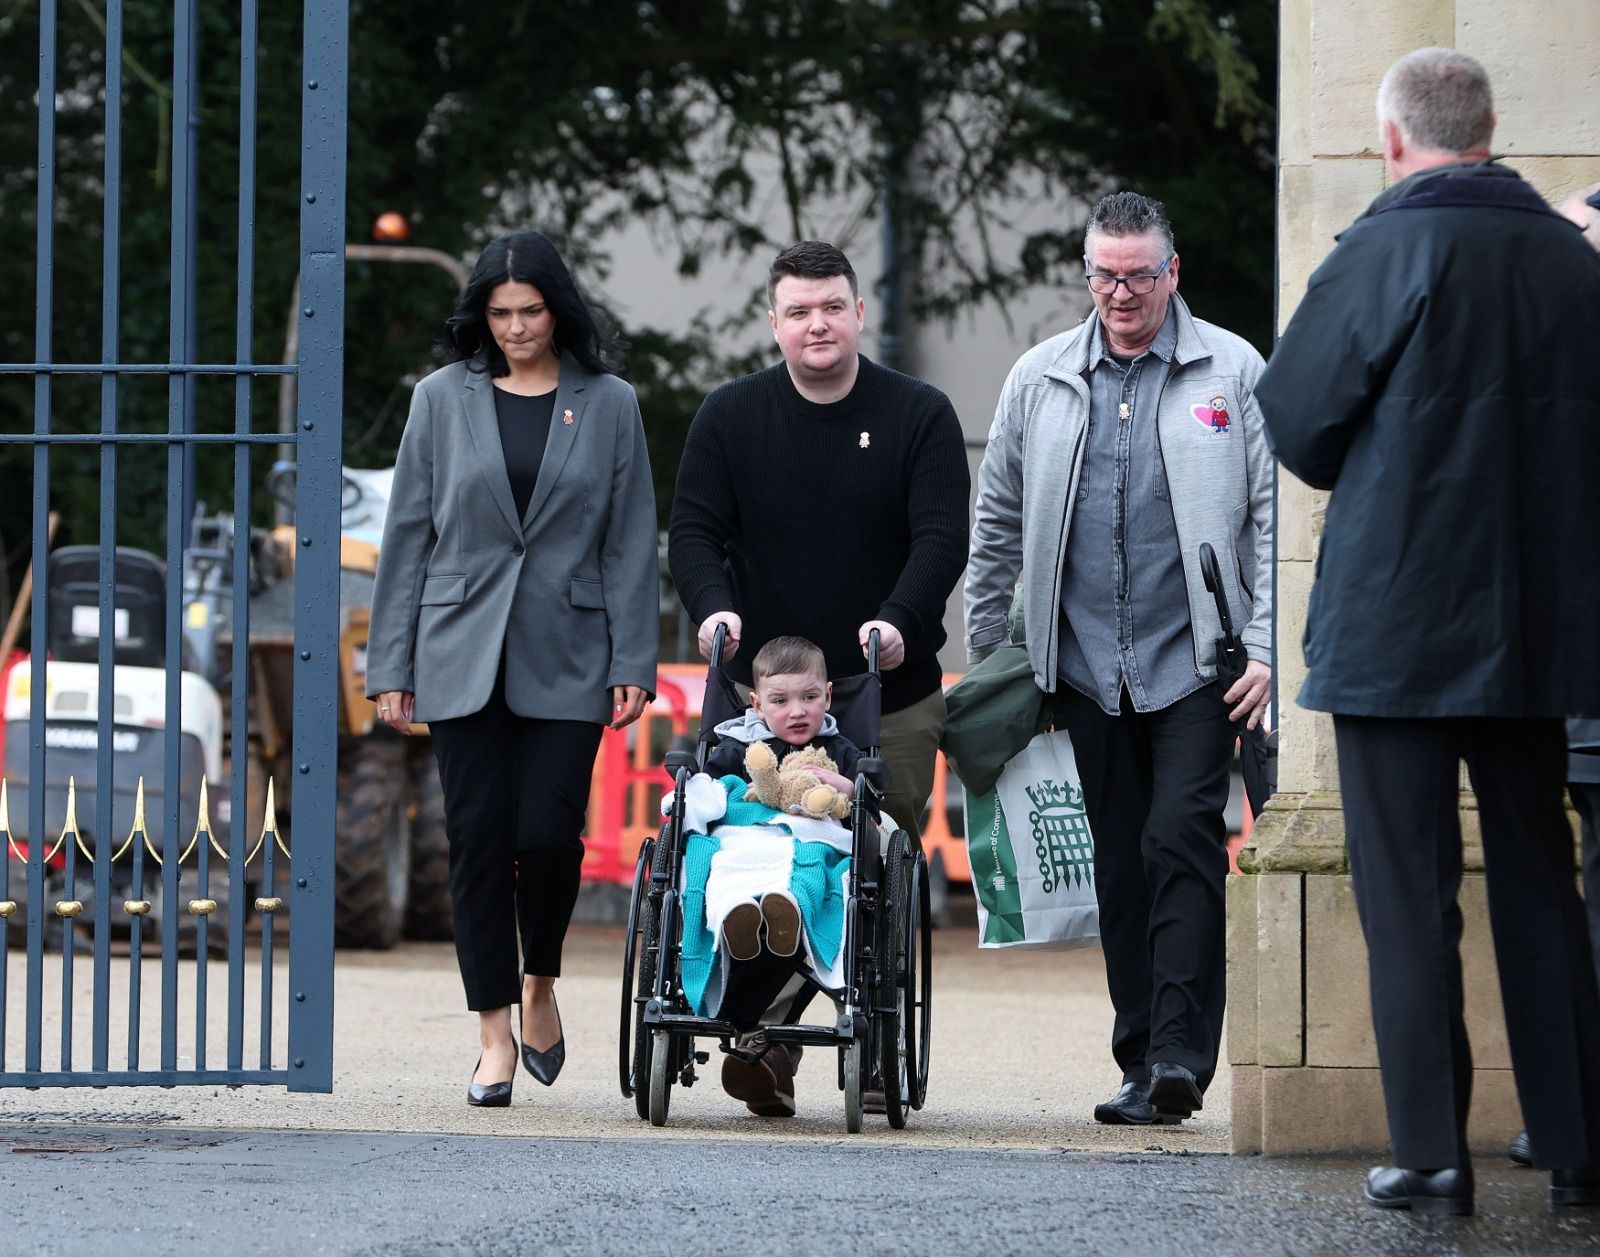 FRUSTRATION: The Mac Gabhann family leave after the meeting with the Secretary of State